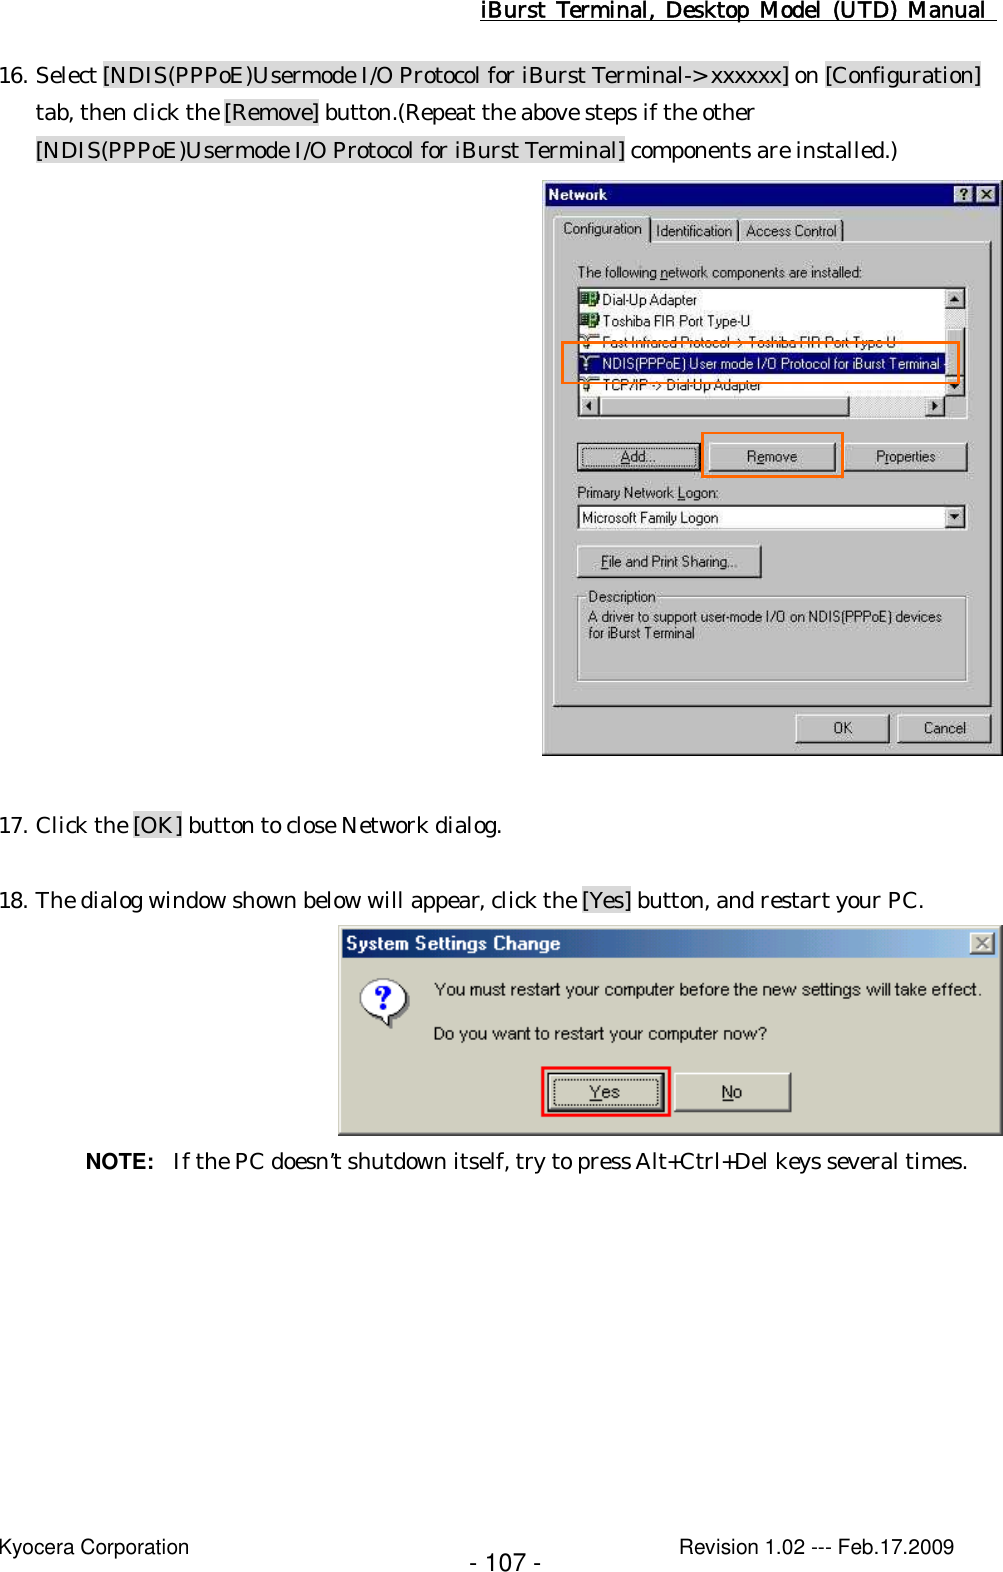 iBurst  Terminal, Desktop  Model  (UTD)  Manual    Kyocera Corporation                                                                                              Revision 1.02 --- Feb.17.2009 - 107 - 16. Select [NDIS(PPPoE)Usermode I/O Protocol for iBurst Terminal-&gt; xxxxxx] on [Configuration] tab, then click the [Remove] button.(Repeat the above steps if the other [NDIS(PPPoE)Usermode I/O Protocol for iBurst Terminal] components are installed.)   17. Click the [OK] button to close Network dialog.  18. The dialog window shown below will appear, click the [Yes] button, and restart your PC.  NOTE:  If the PC doesn’t shutdown itself, try to press Alt+Ctrl+Del keys several times.  